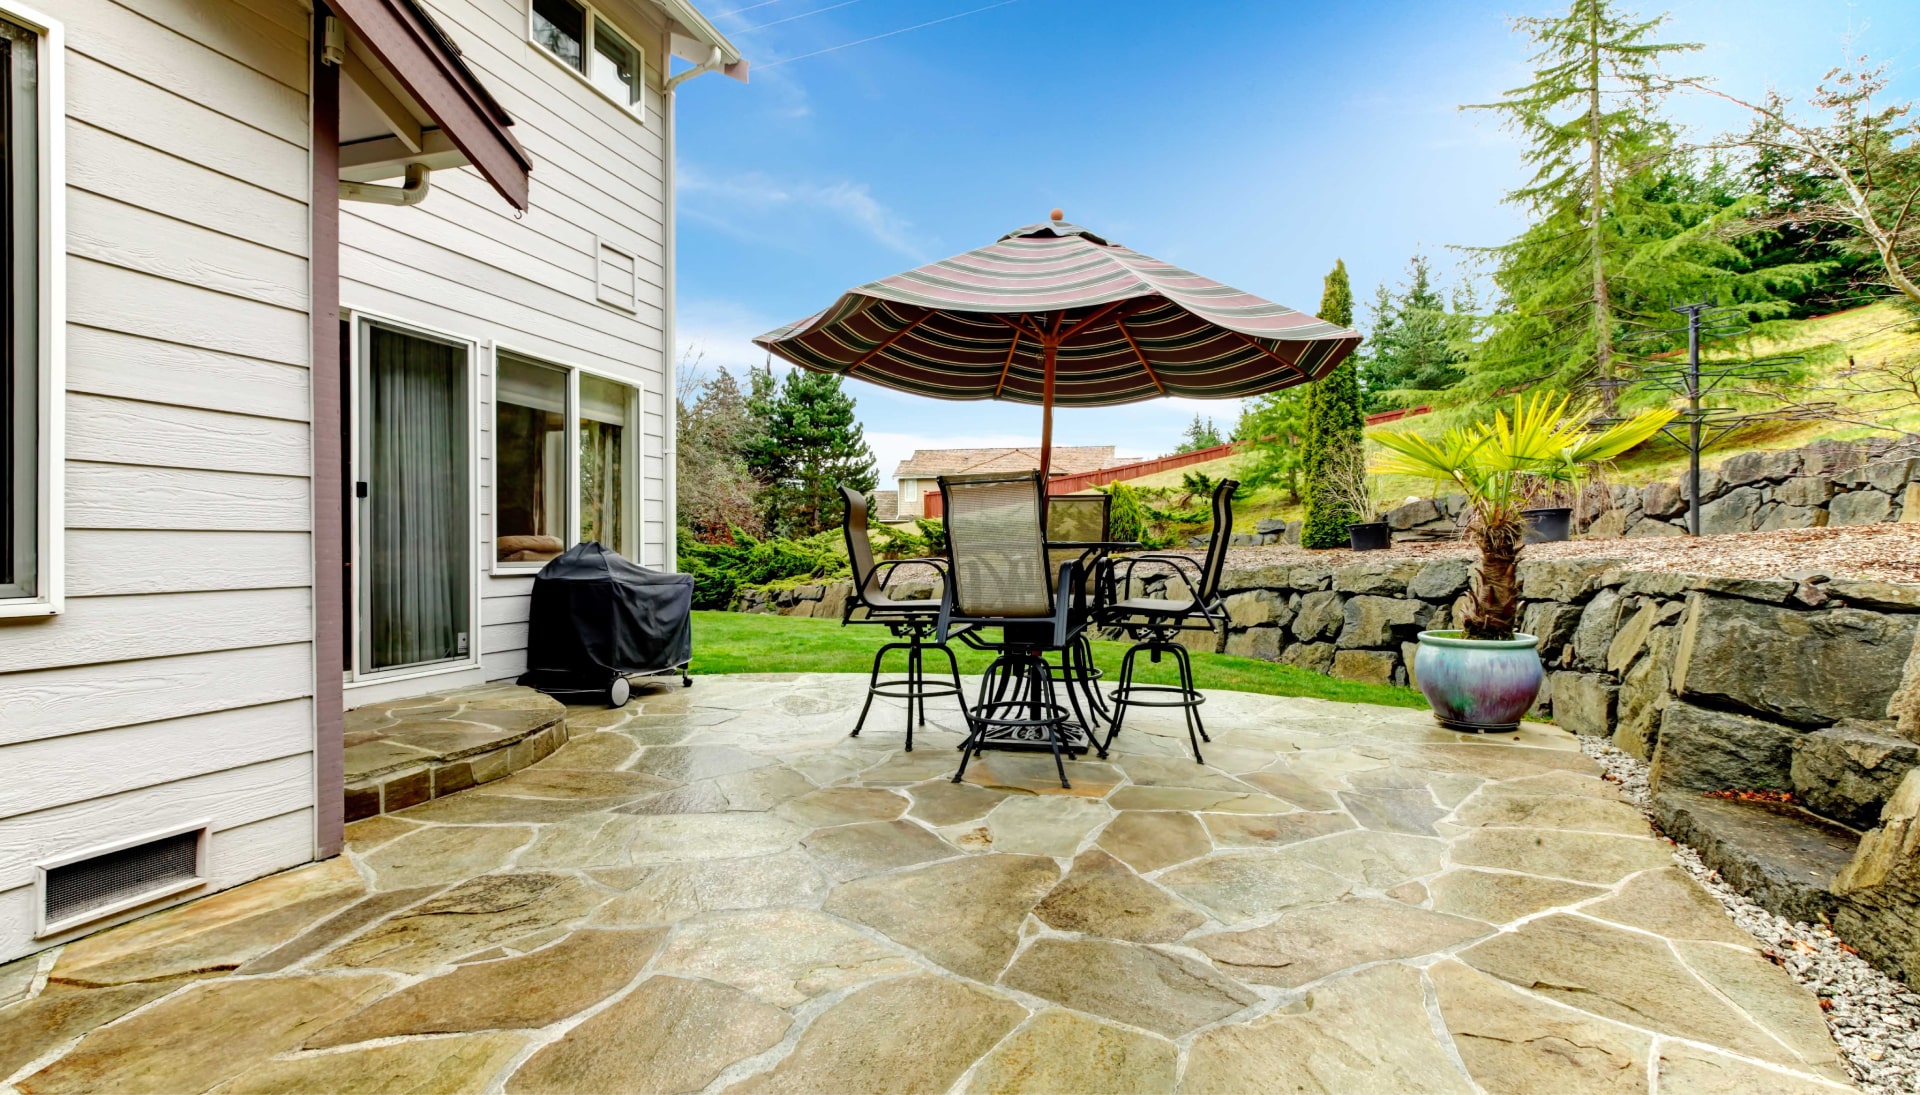 Beautifully Textured and Patterned Concrete Patios in Sonoma County, California area!